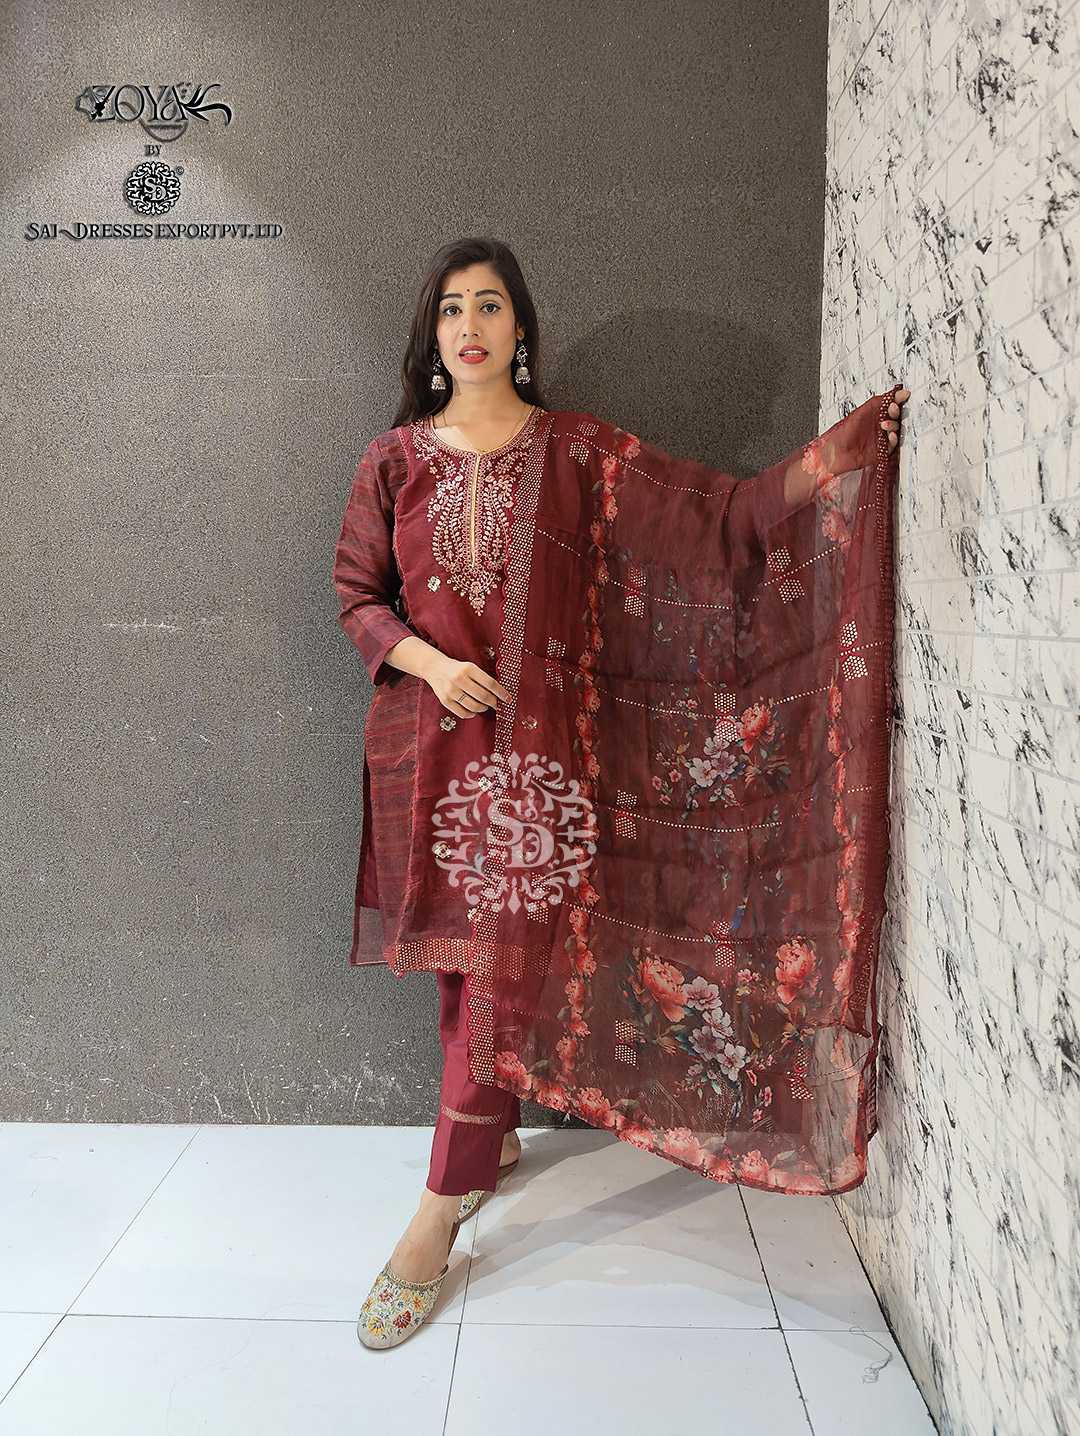 SAI DRESSES PRESENT D.NO SD1052 TO SD1055 READY TO EXCLUSIVE FESTIVE WEAR DESIGNER PAKISTANI 3 PIECE CONCEPT COMBO COLLECTION IN WHOLESALE RATE IN SURAT